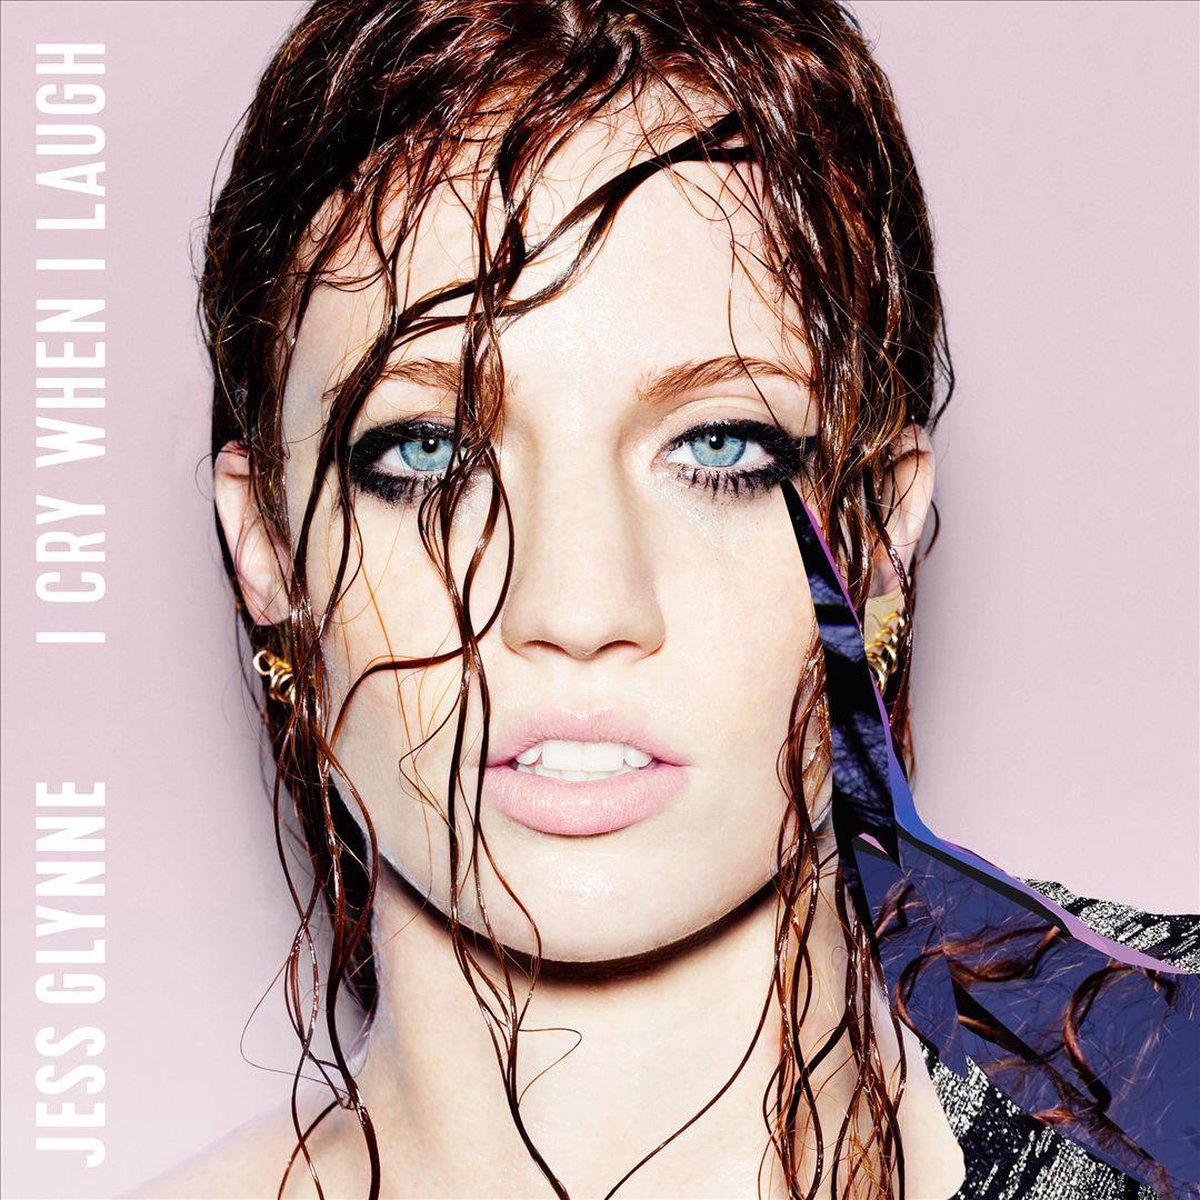 I Cry When I Laugh (Deluxe) - Jess Glynne